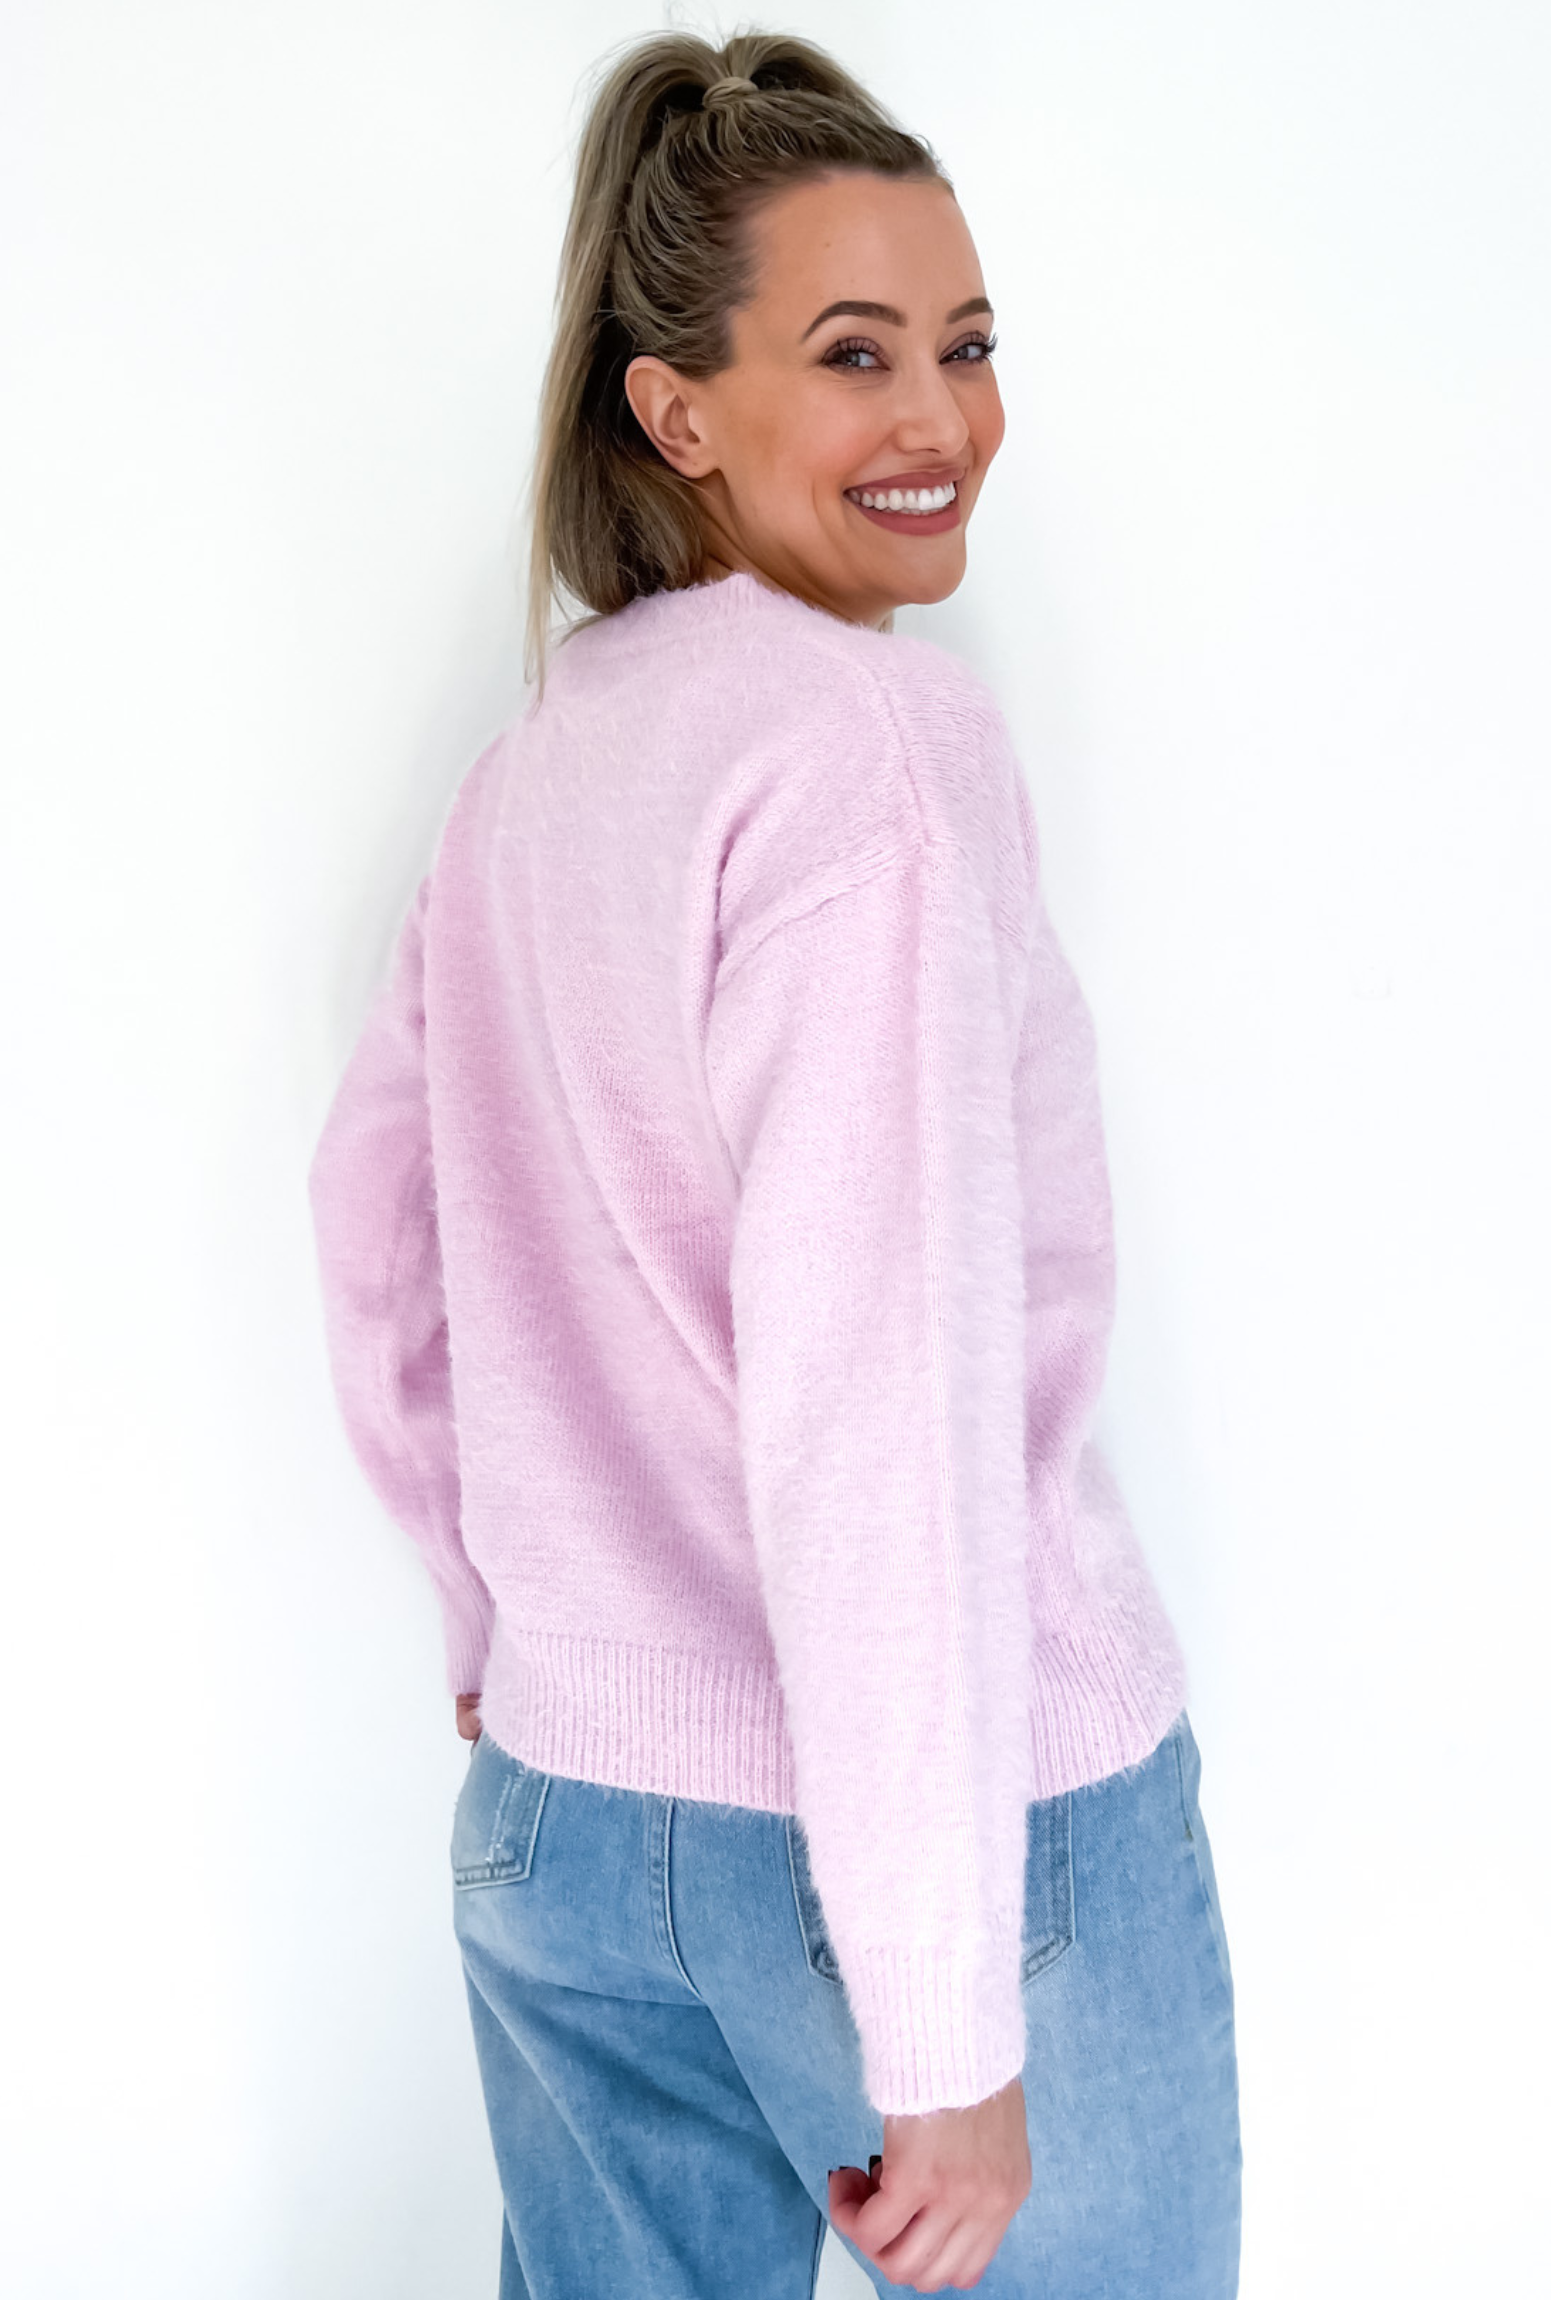 Mable Knit - Light Pink